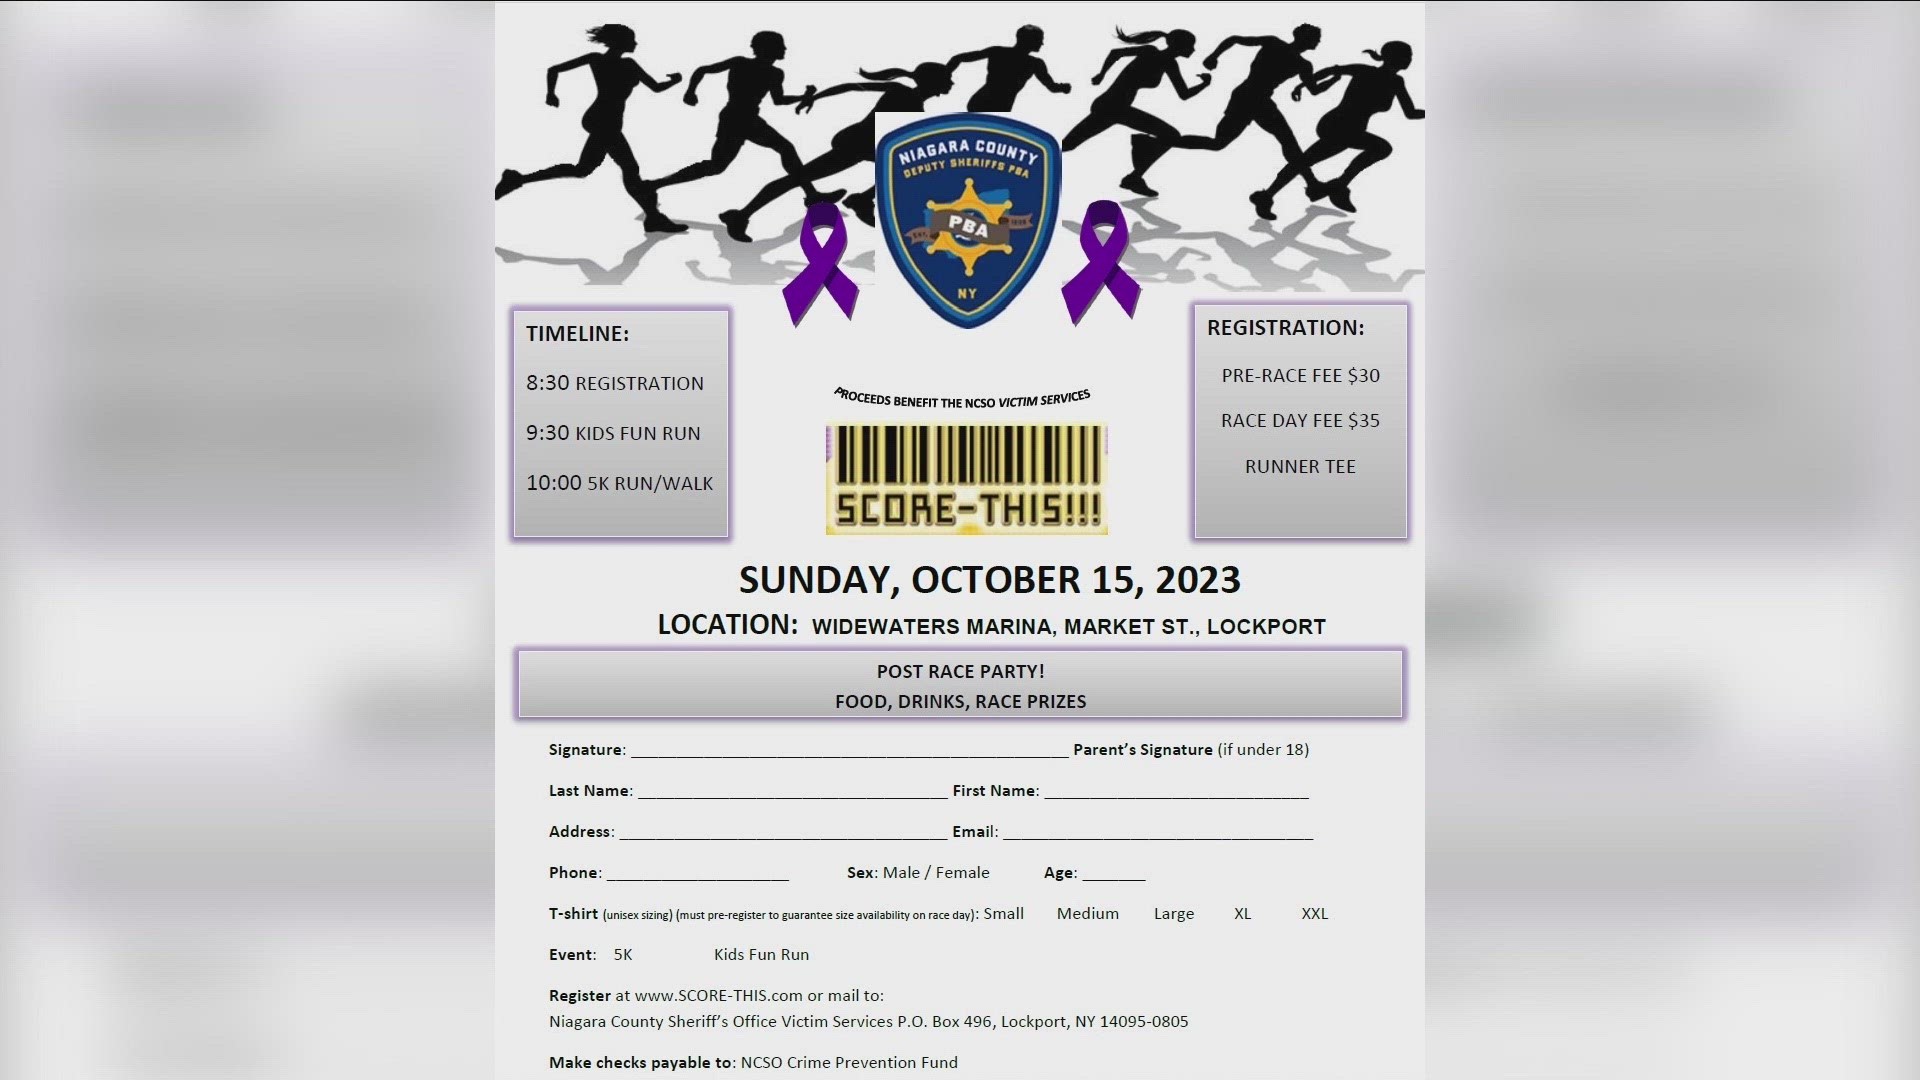 The Niagara County Sheriff's Office is hosting their annual 5K fundraiser on Sunday, October 15 with races beginning at 9:30 a.m. and 10 a.m. at Widewaters Marina.